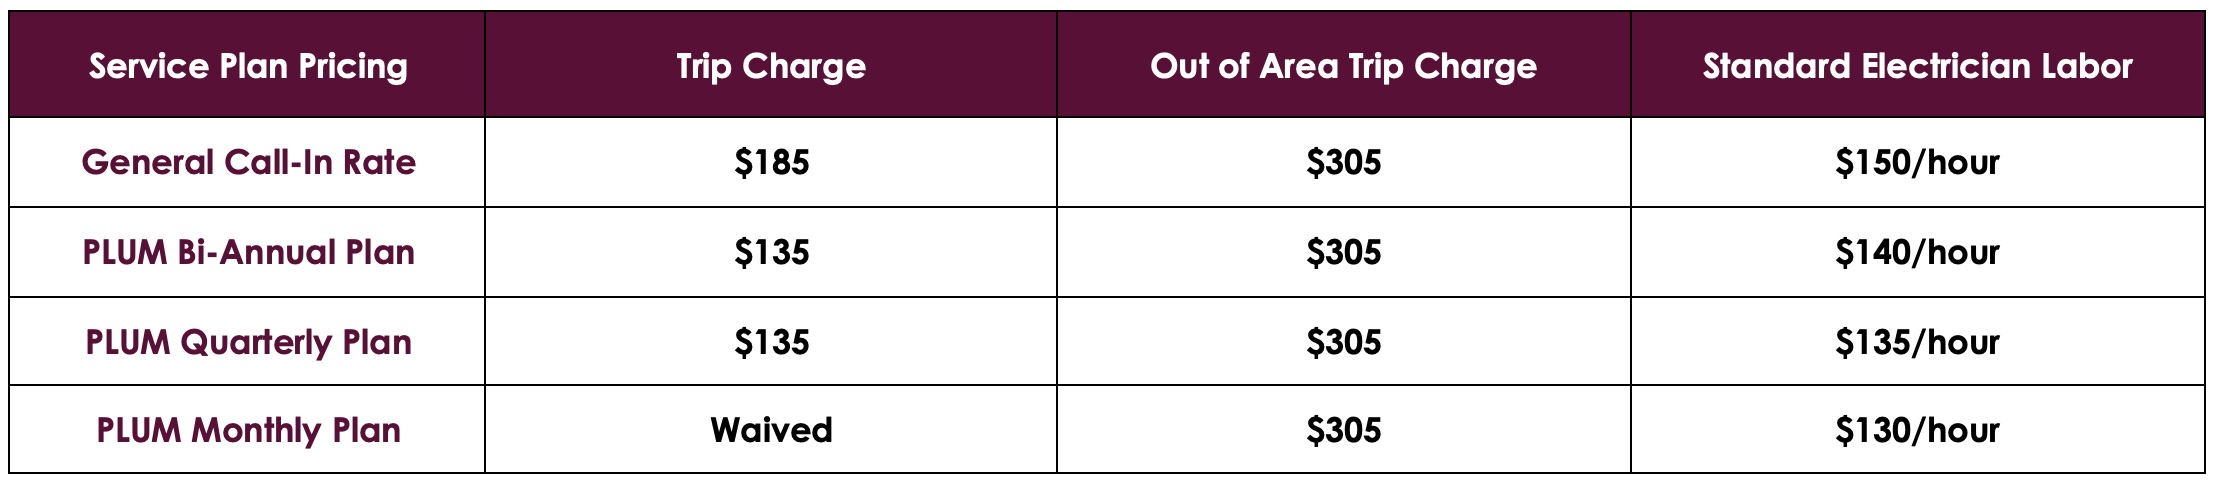 PLUM Service Plan Pricing By Frequency Schedule